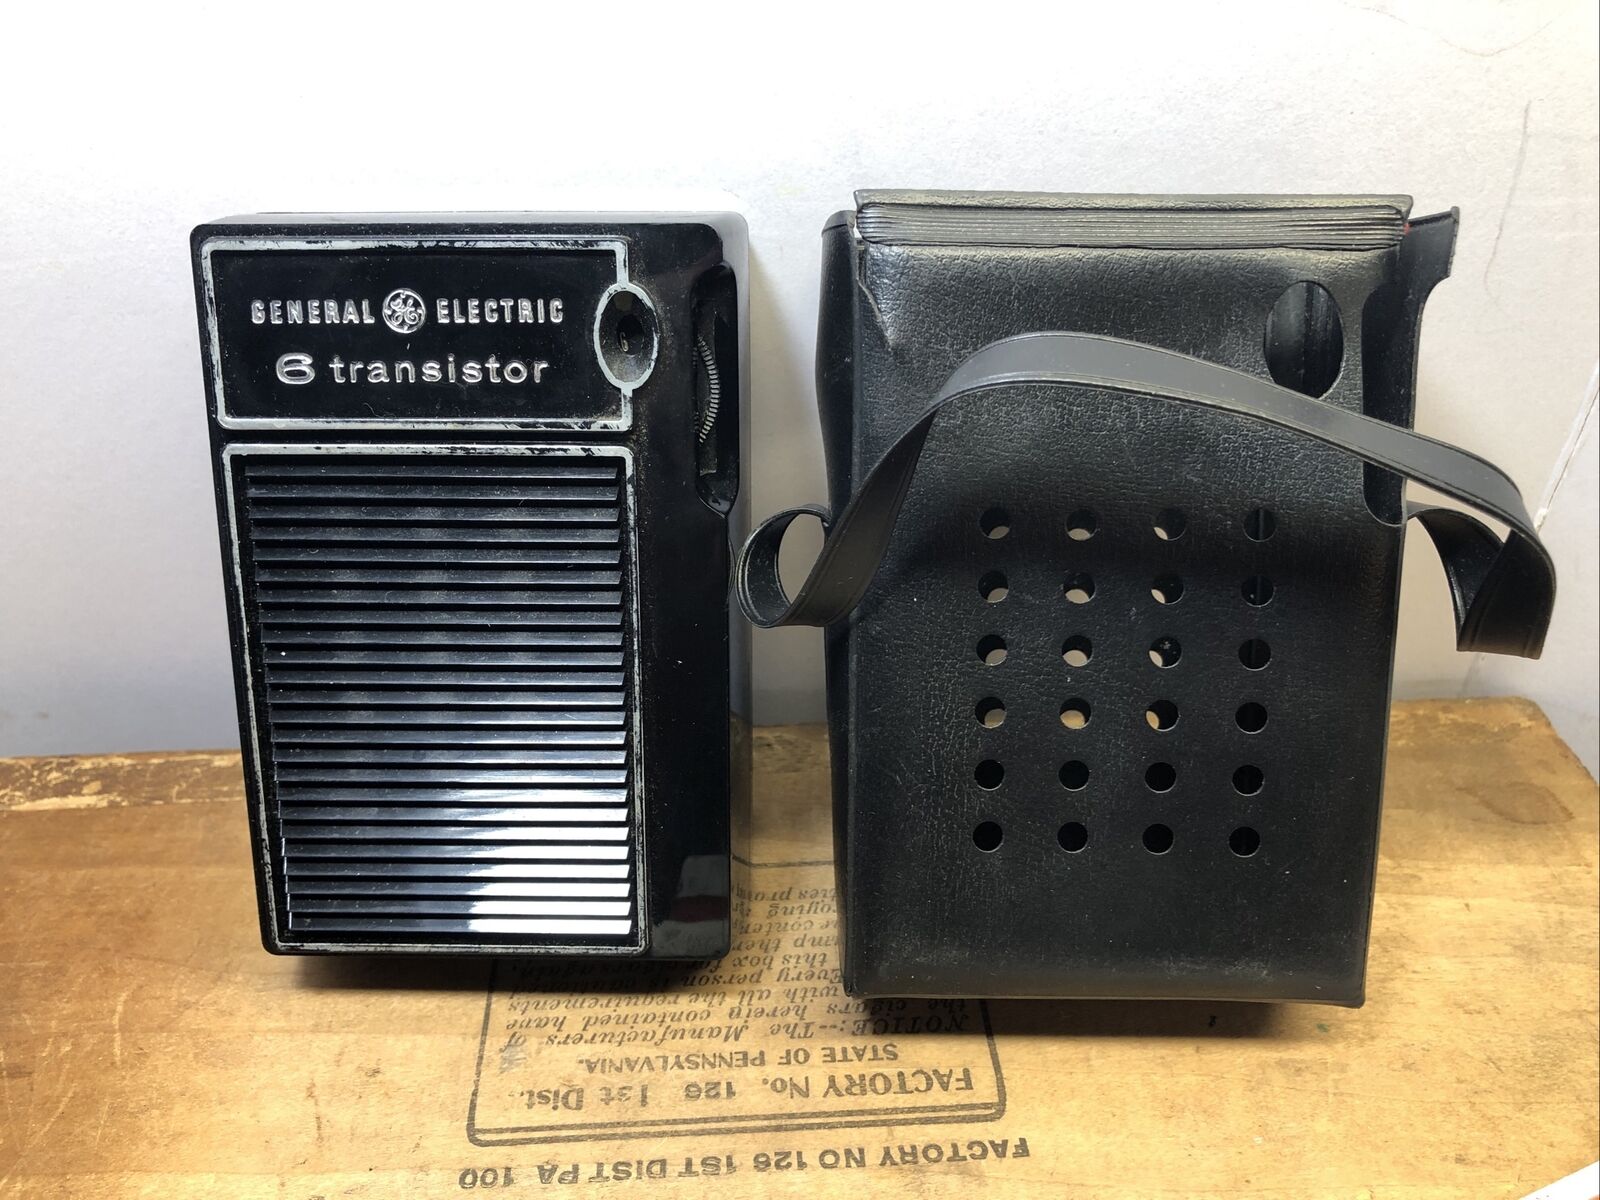 Vintage General Electric Transistor Radio GE AM 6 And Case. Does Not Work.